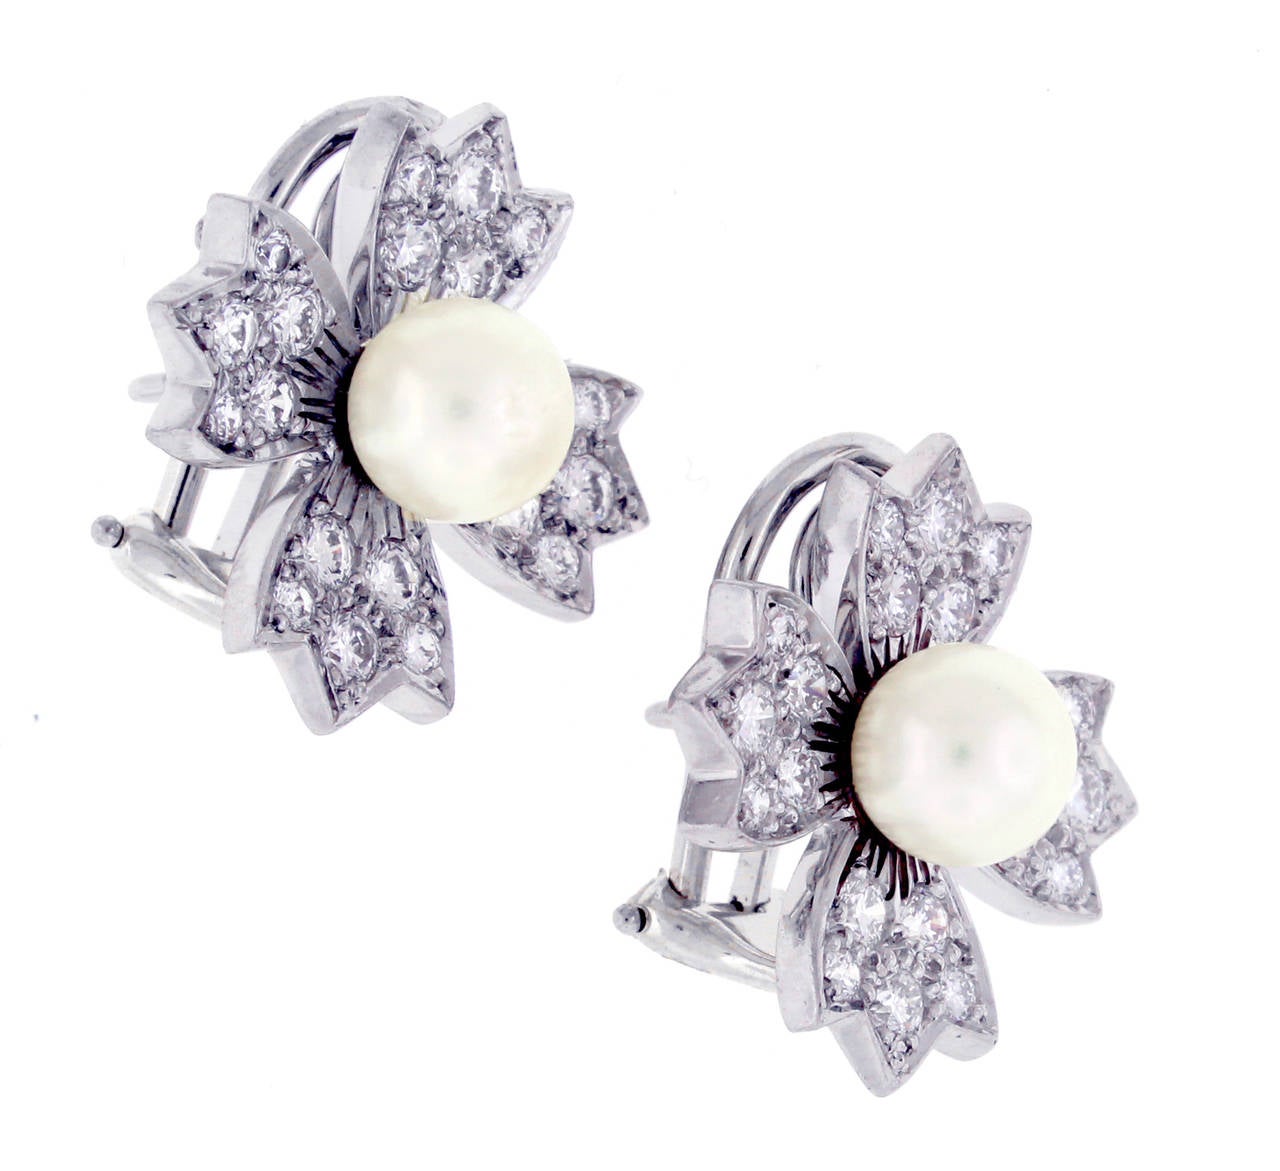 Wonderful Tiffany and Co diamond and pearl flower earrings.  Forty brilliant cut diamonds and two cultured 61/2mm cultured pearls make a statement of harmony and elegance. Set in platinum